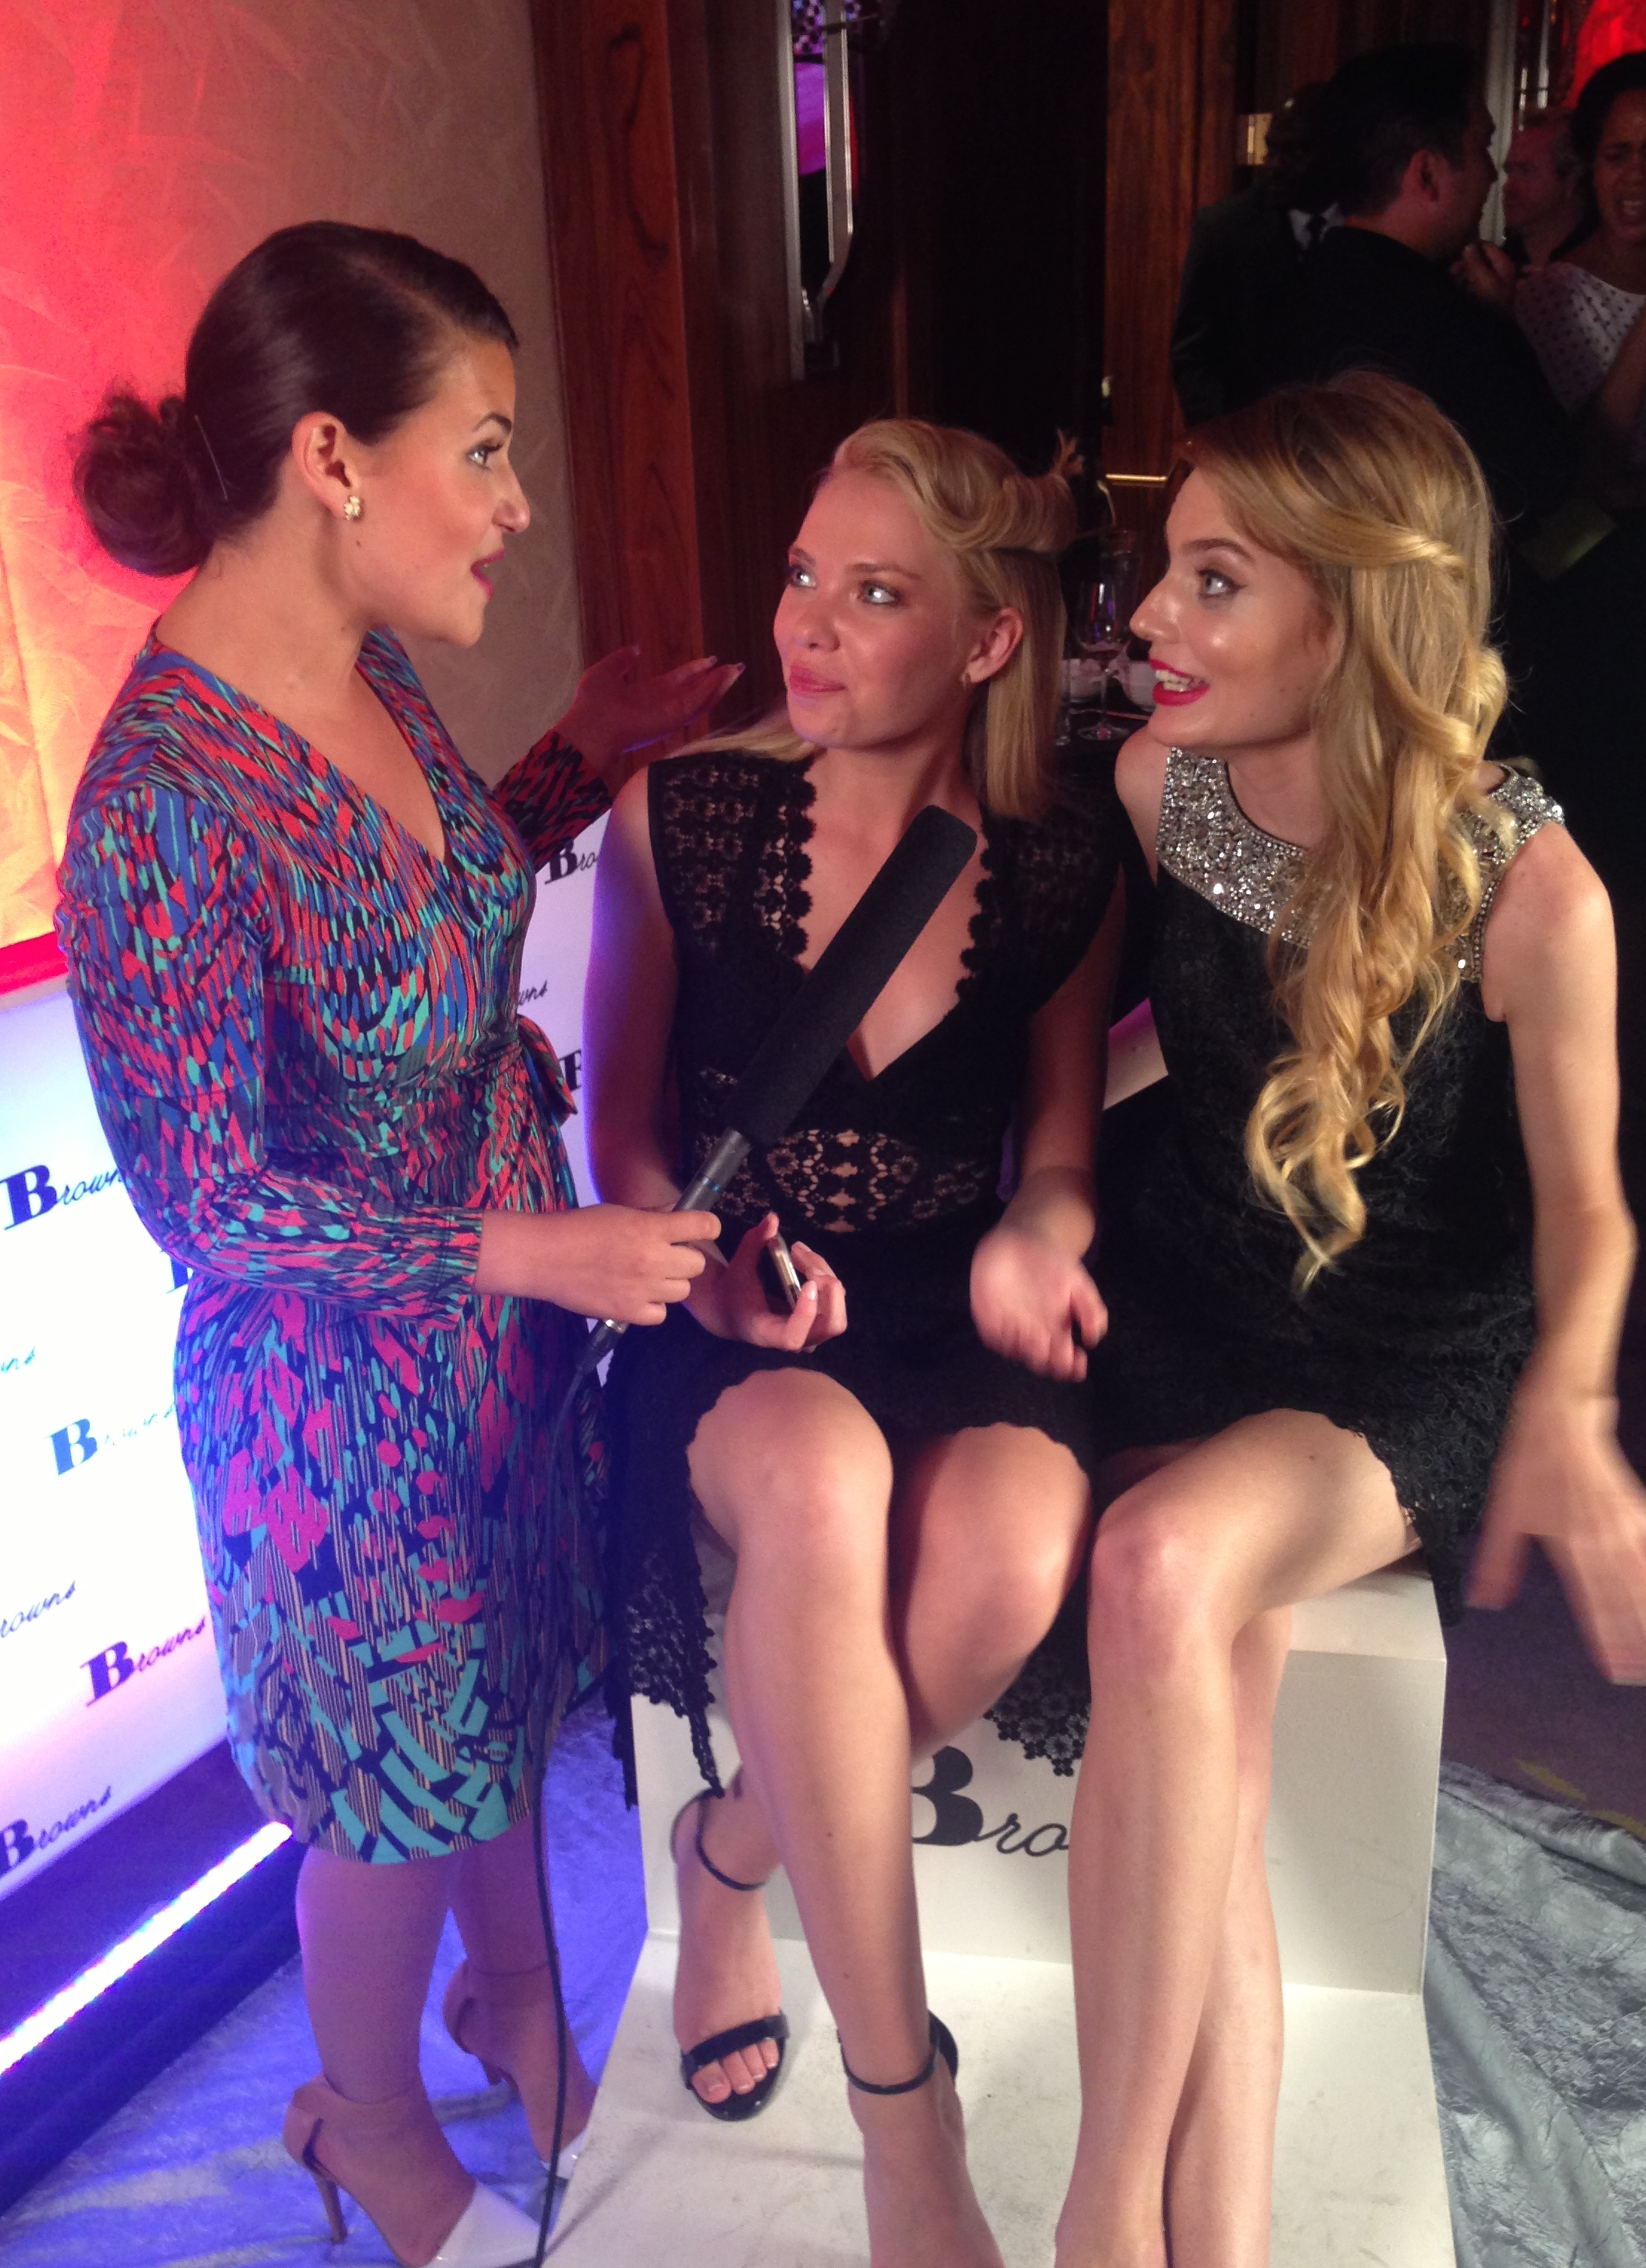 Clara Pasieka & Maps to the Stars co-star Emilia McCarthy are interviewed at the Hello! Magazine Top 25 New Stars Event